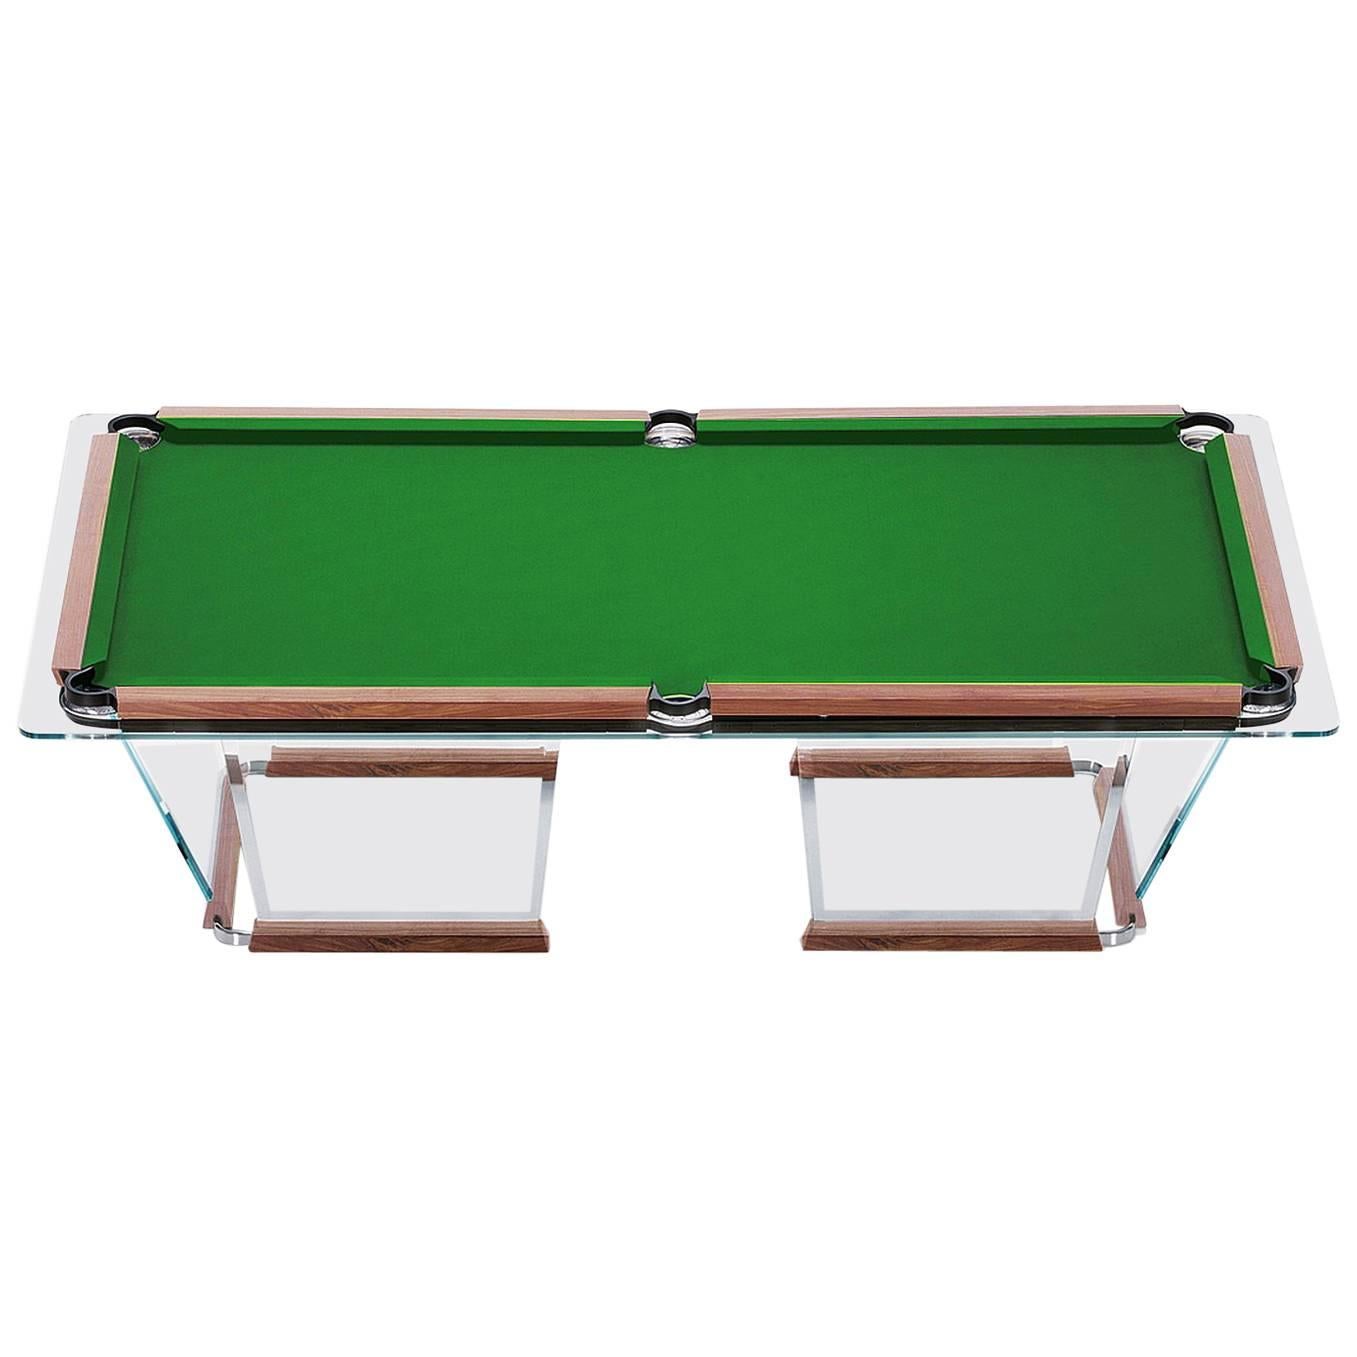 "T1.2" Crystal Pool Table with Leather or Walnut Covers by M. Sadler for Teckell